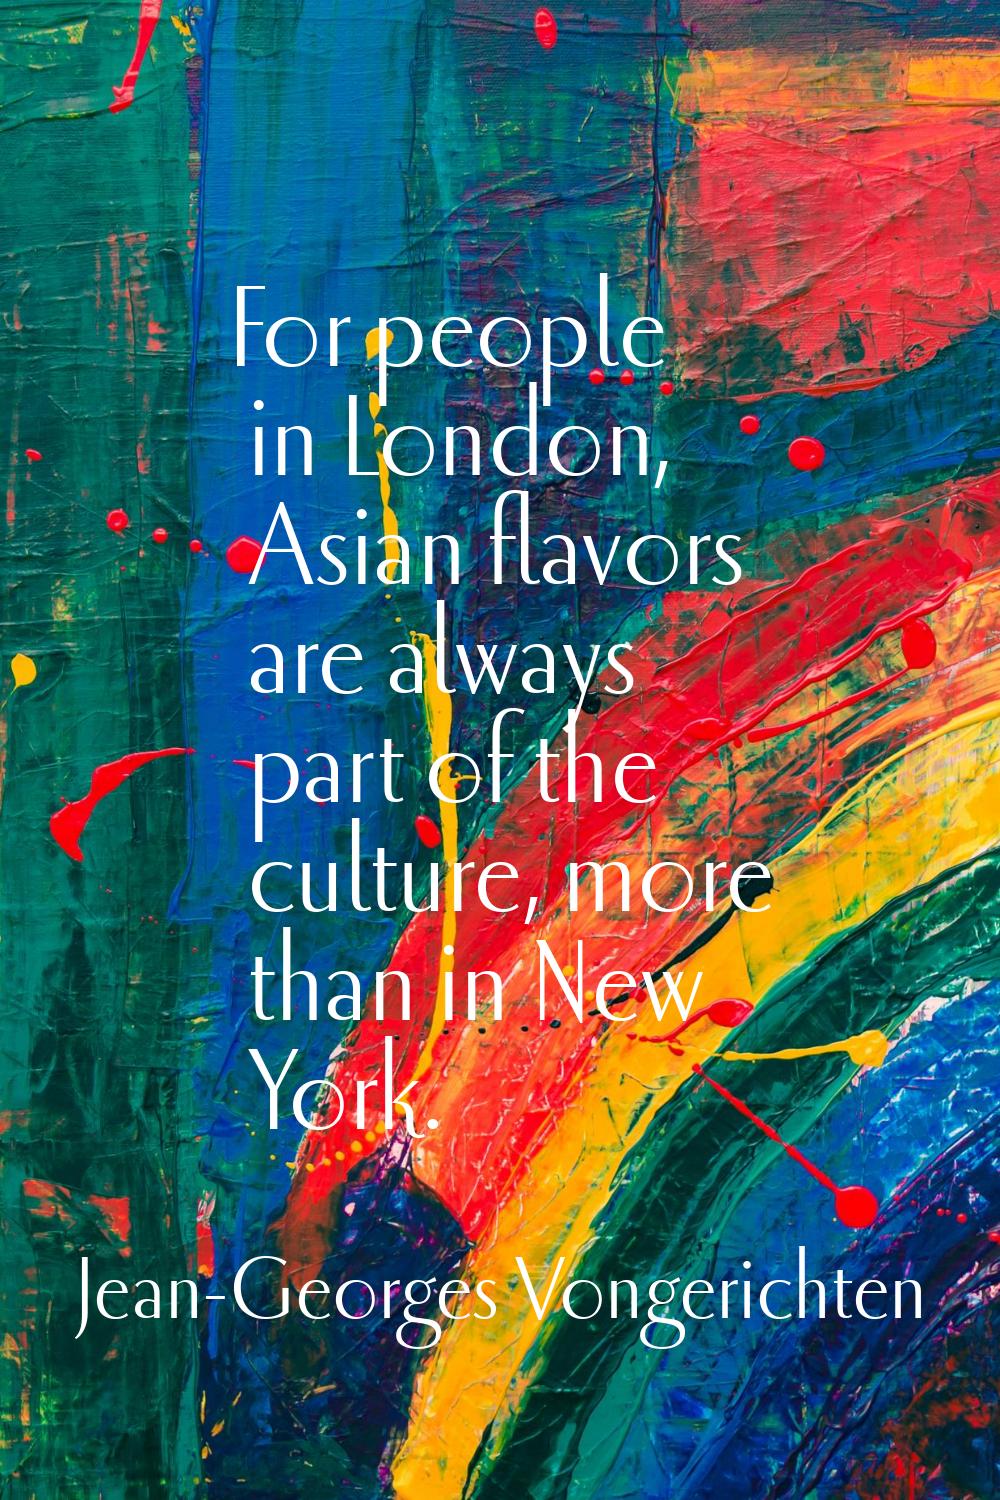 For people in London, Asian flavors are always part of the culture, more than in New York.